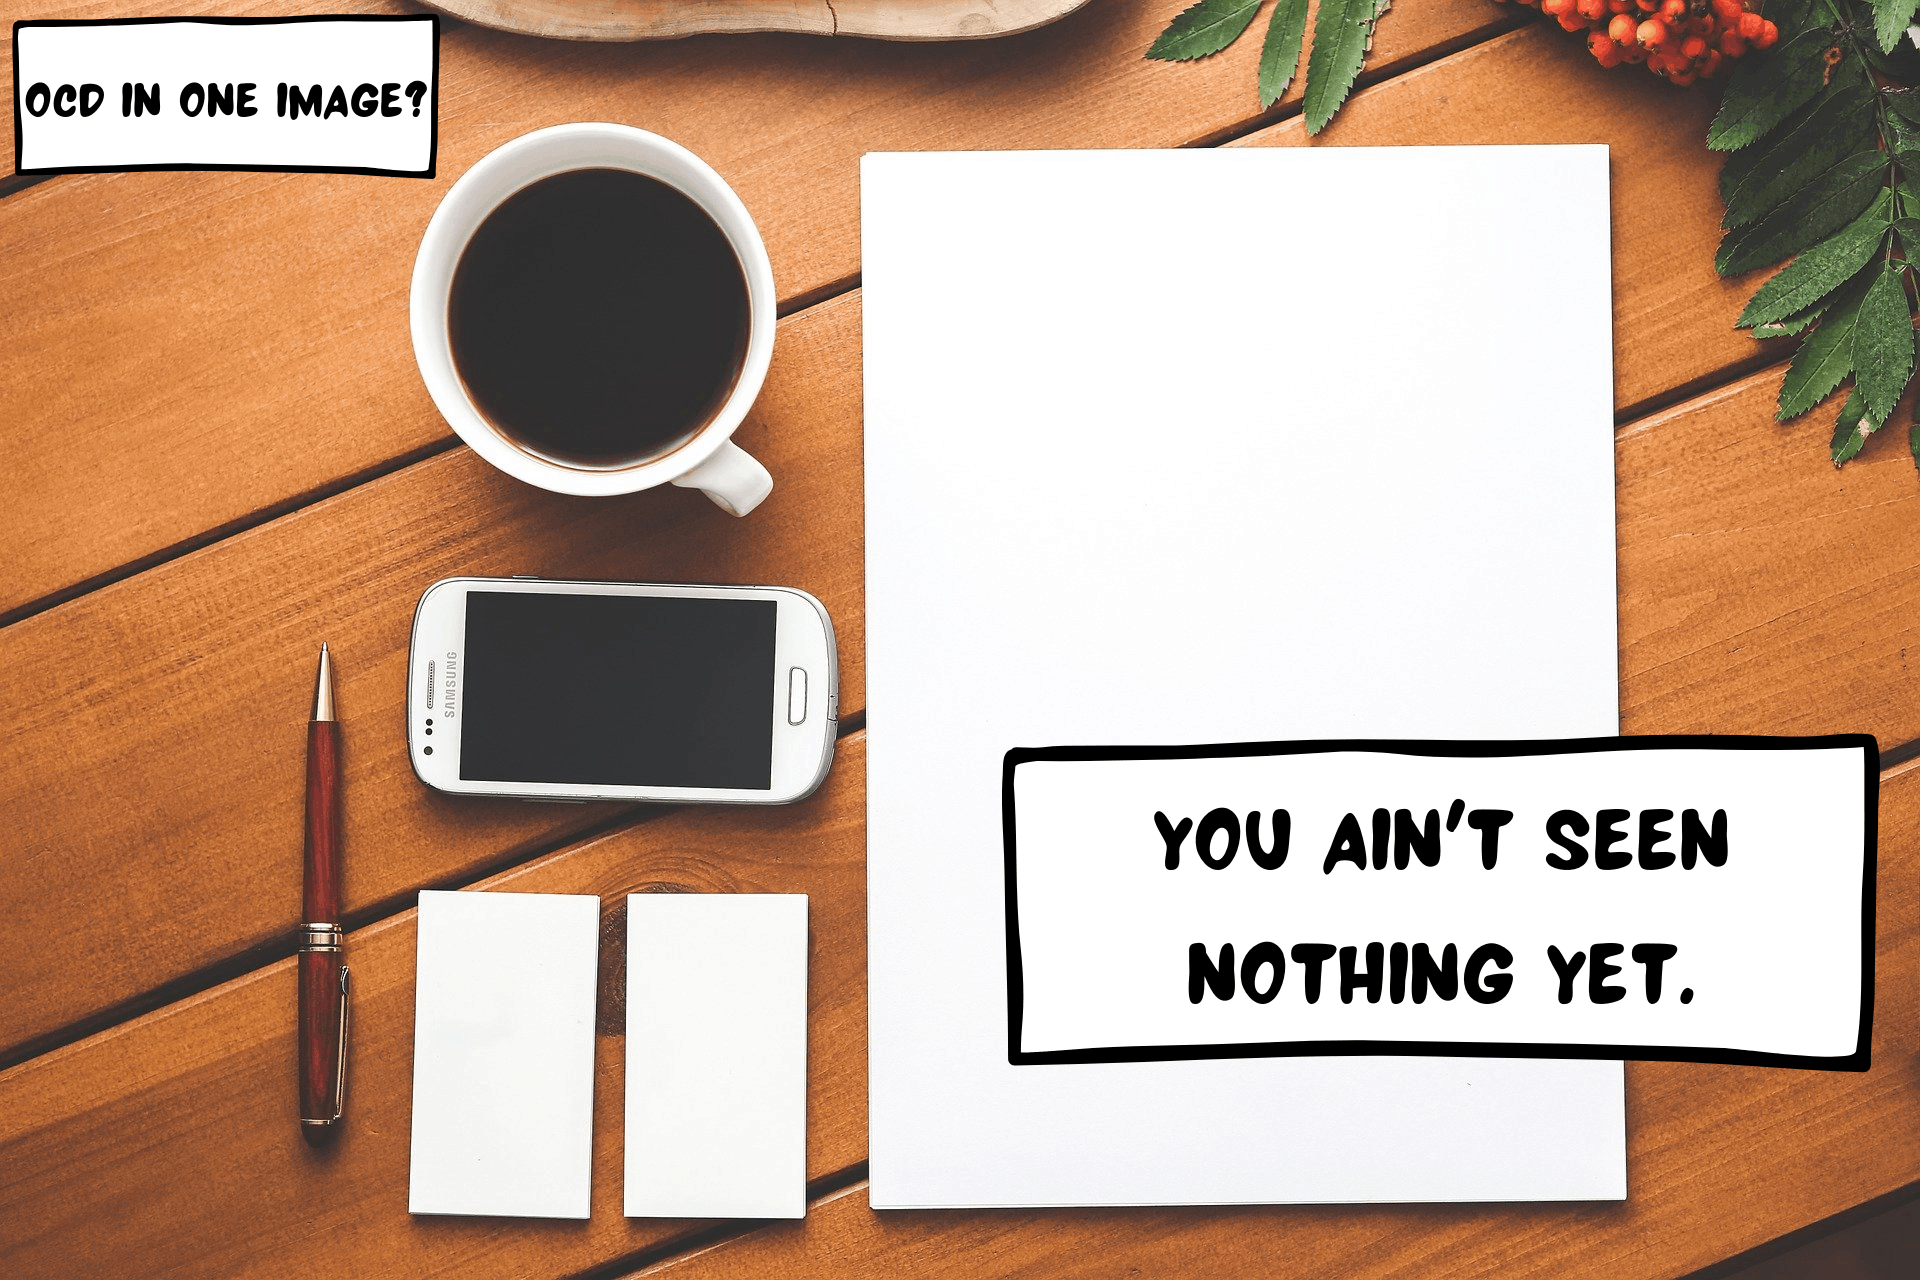 Image by Karolina Grabowska from Pixabay. Wood table with paper and other objects neatly aligned and organized. Two comic text box bubbles. One says: "OCD in one image?" The other says "You ain't seen nothing yet."